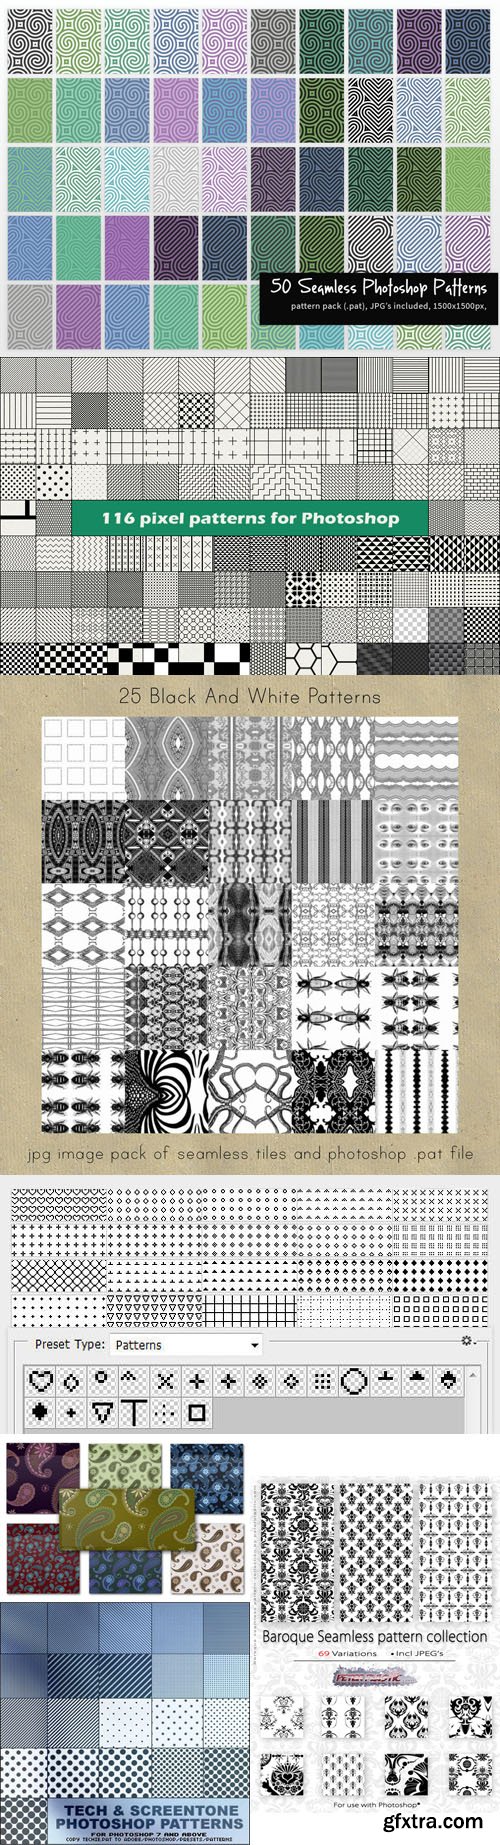 Awesomre Seamless Patterns Collection for Photoshop